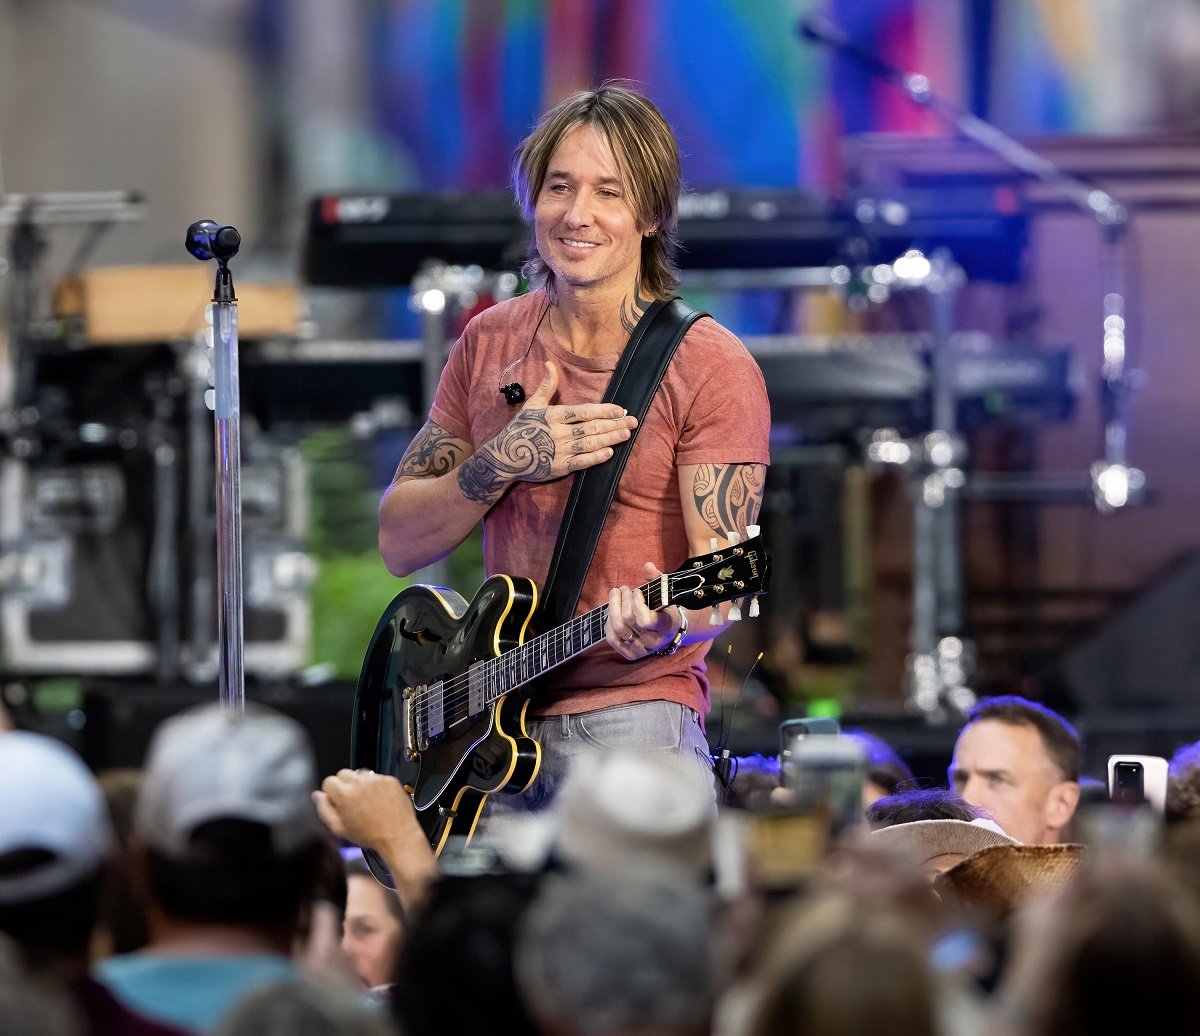 Keith Urban Says the Audience Has Changed on His 'The Speed of Now